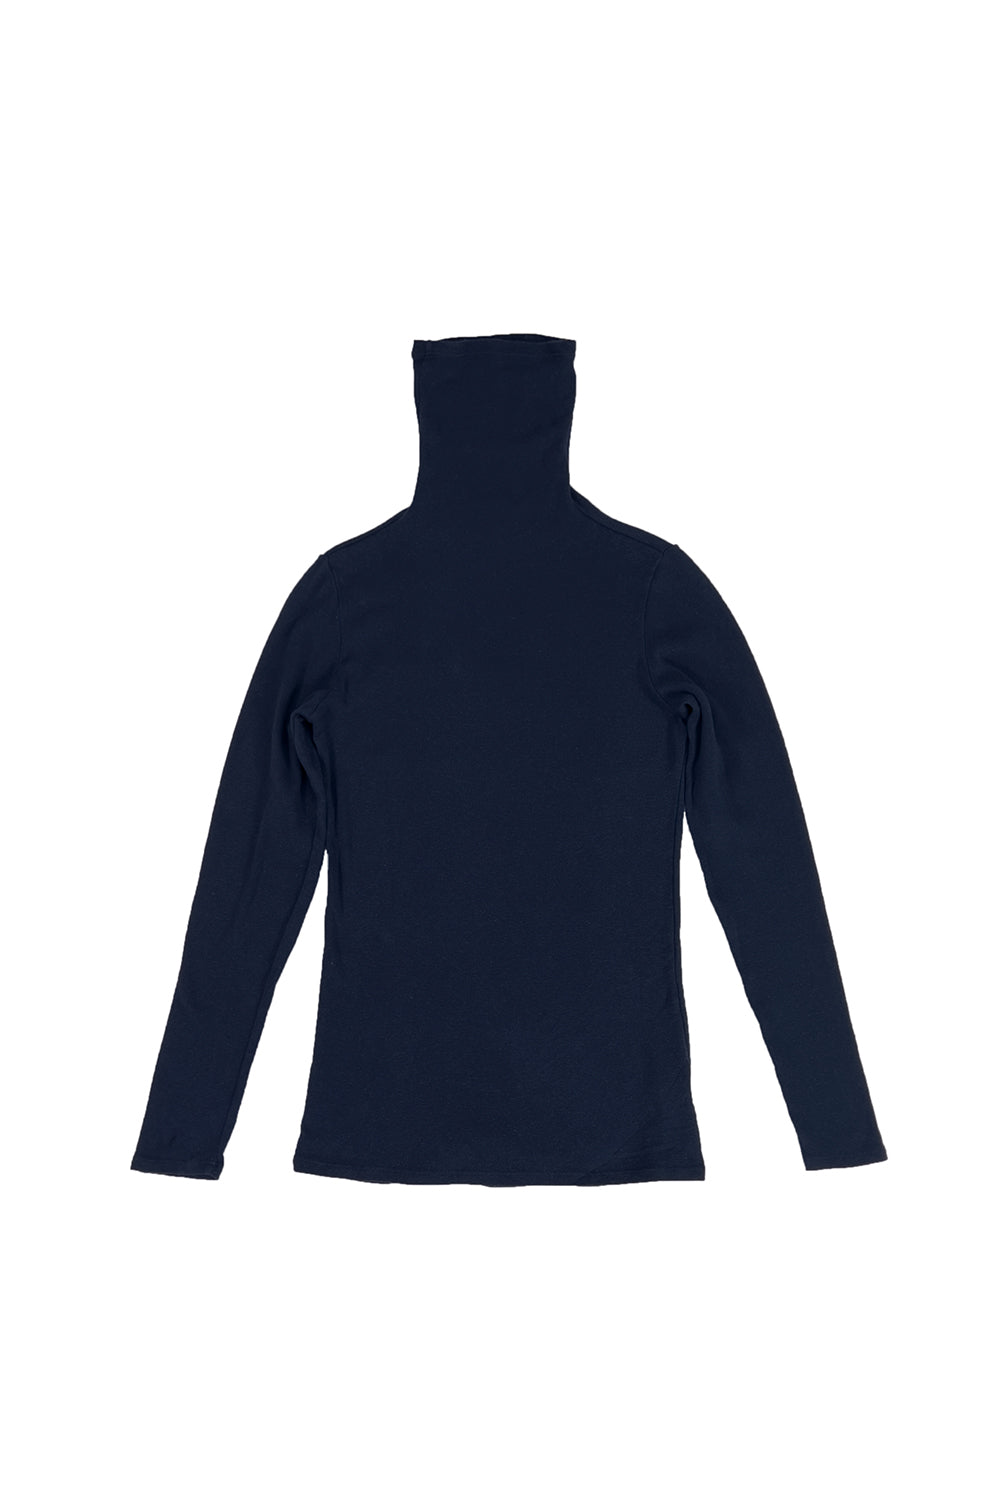 Whidbey Turtleneck | Jungmaven Hemp Clothing & Accessories / Color: Navy